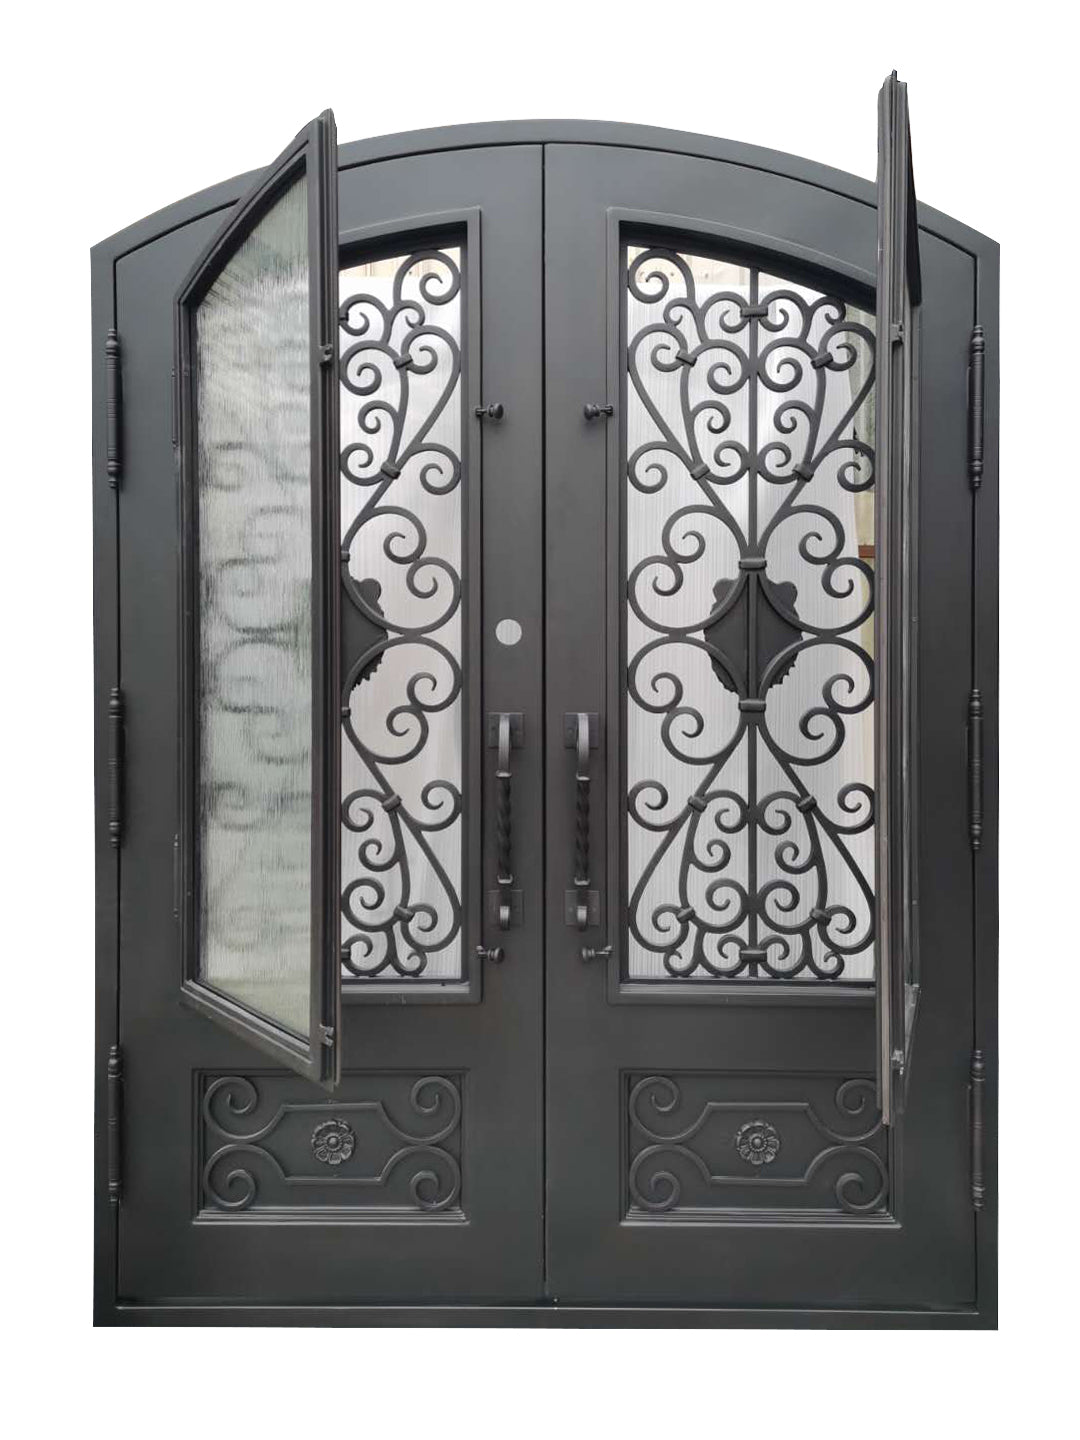 Princeton Model Double Front Entry Iron Door With Tempered Rain Glass Dark Bronze Finish - AAWAIZ IMPORTS